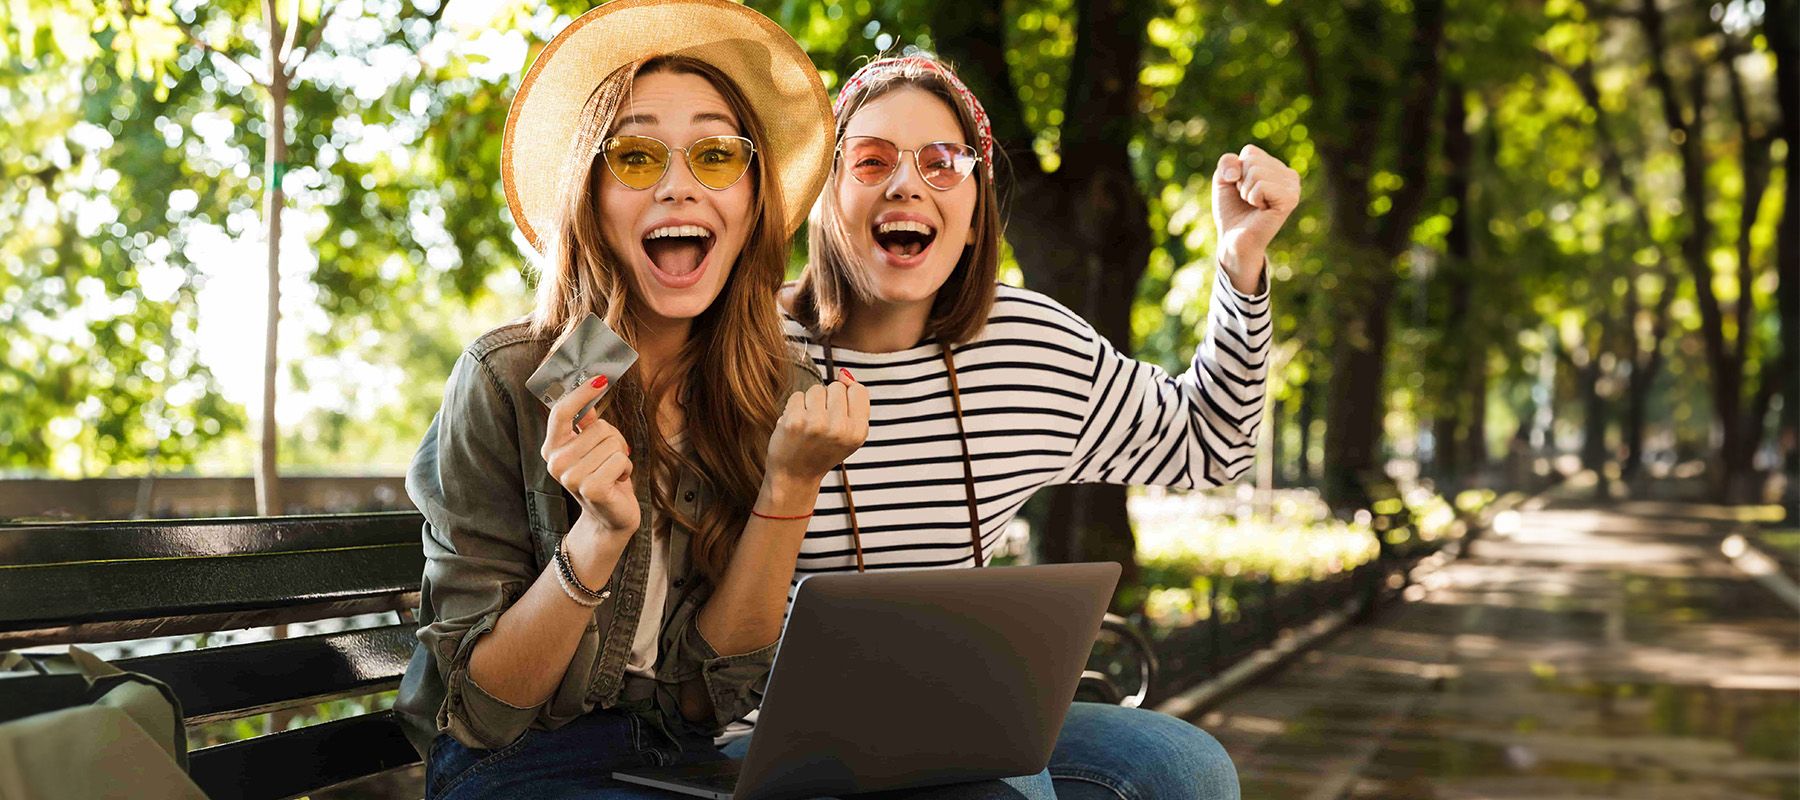 Photo of young emotional excited happy ladies friends outdoors sitting using laptop computer holding credit card.